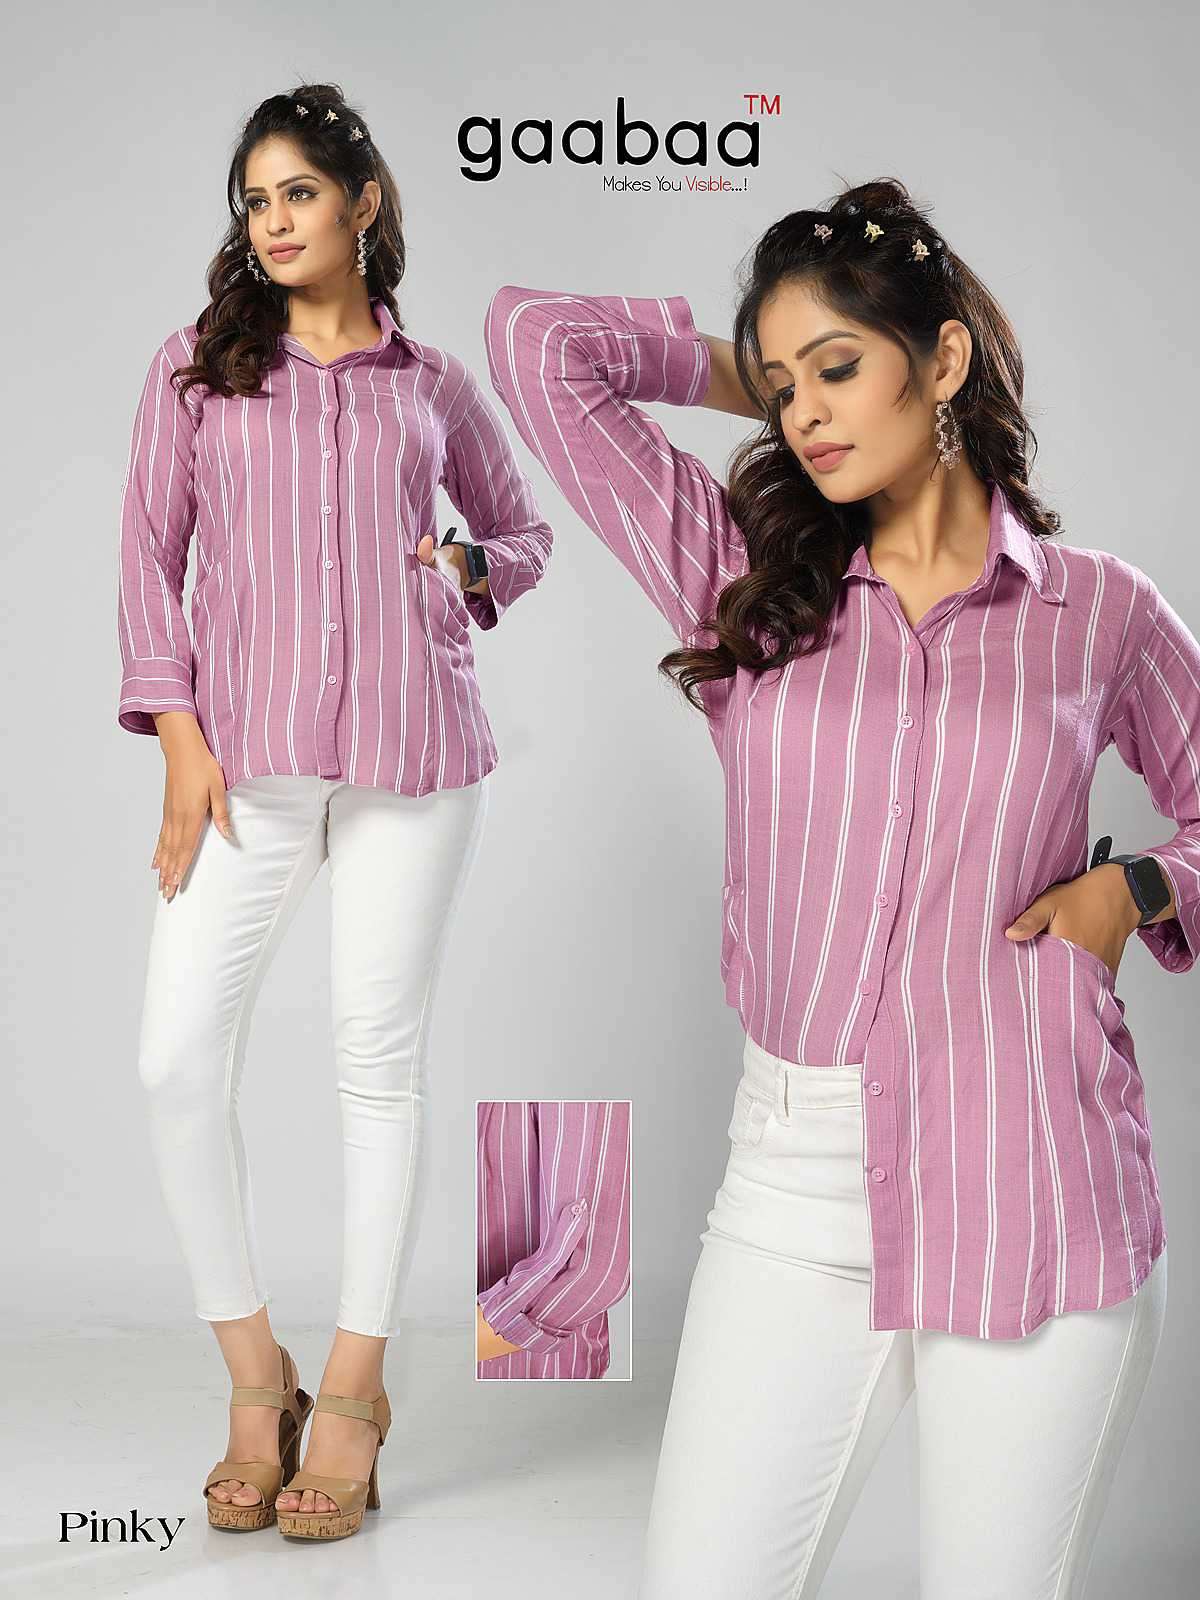 Gaabaa Pinky Office Wear Ladies Shirt Combo Designs Outfit